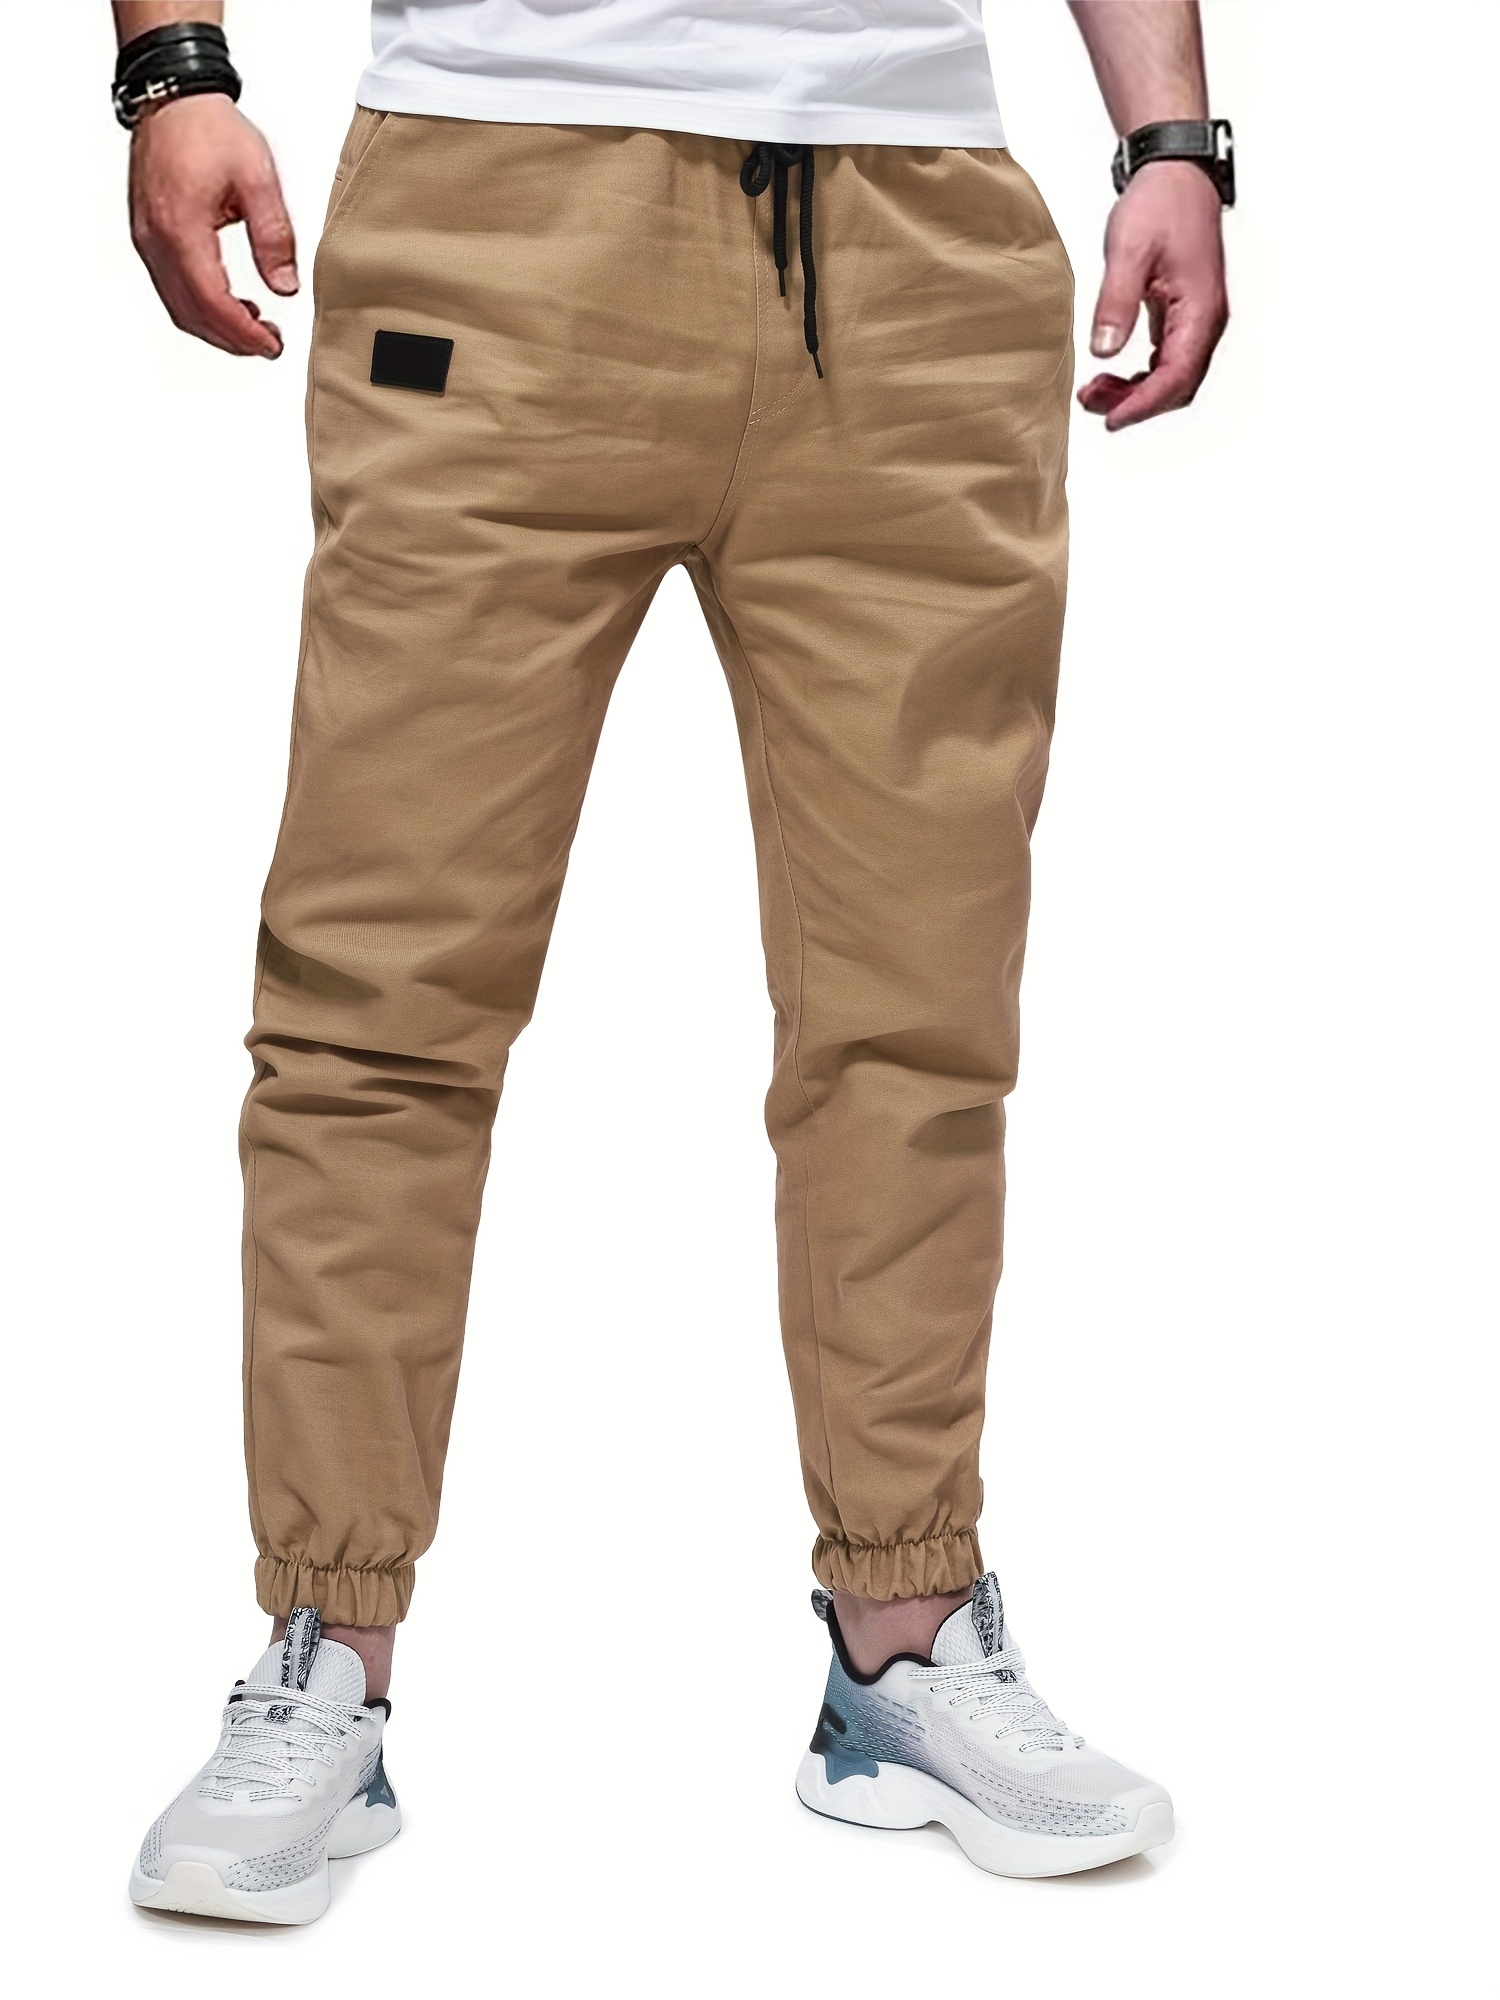 Jophufed Men's Pants Short Pants Made Of Pure Cotton Fabric Are Thin And  Breathable 